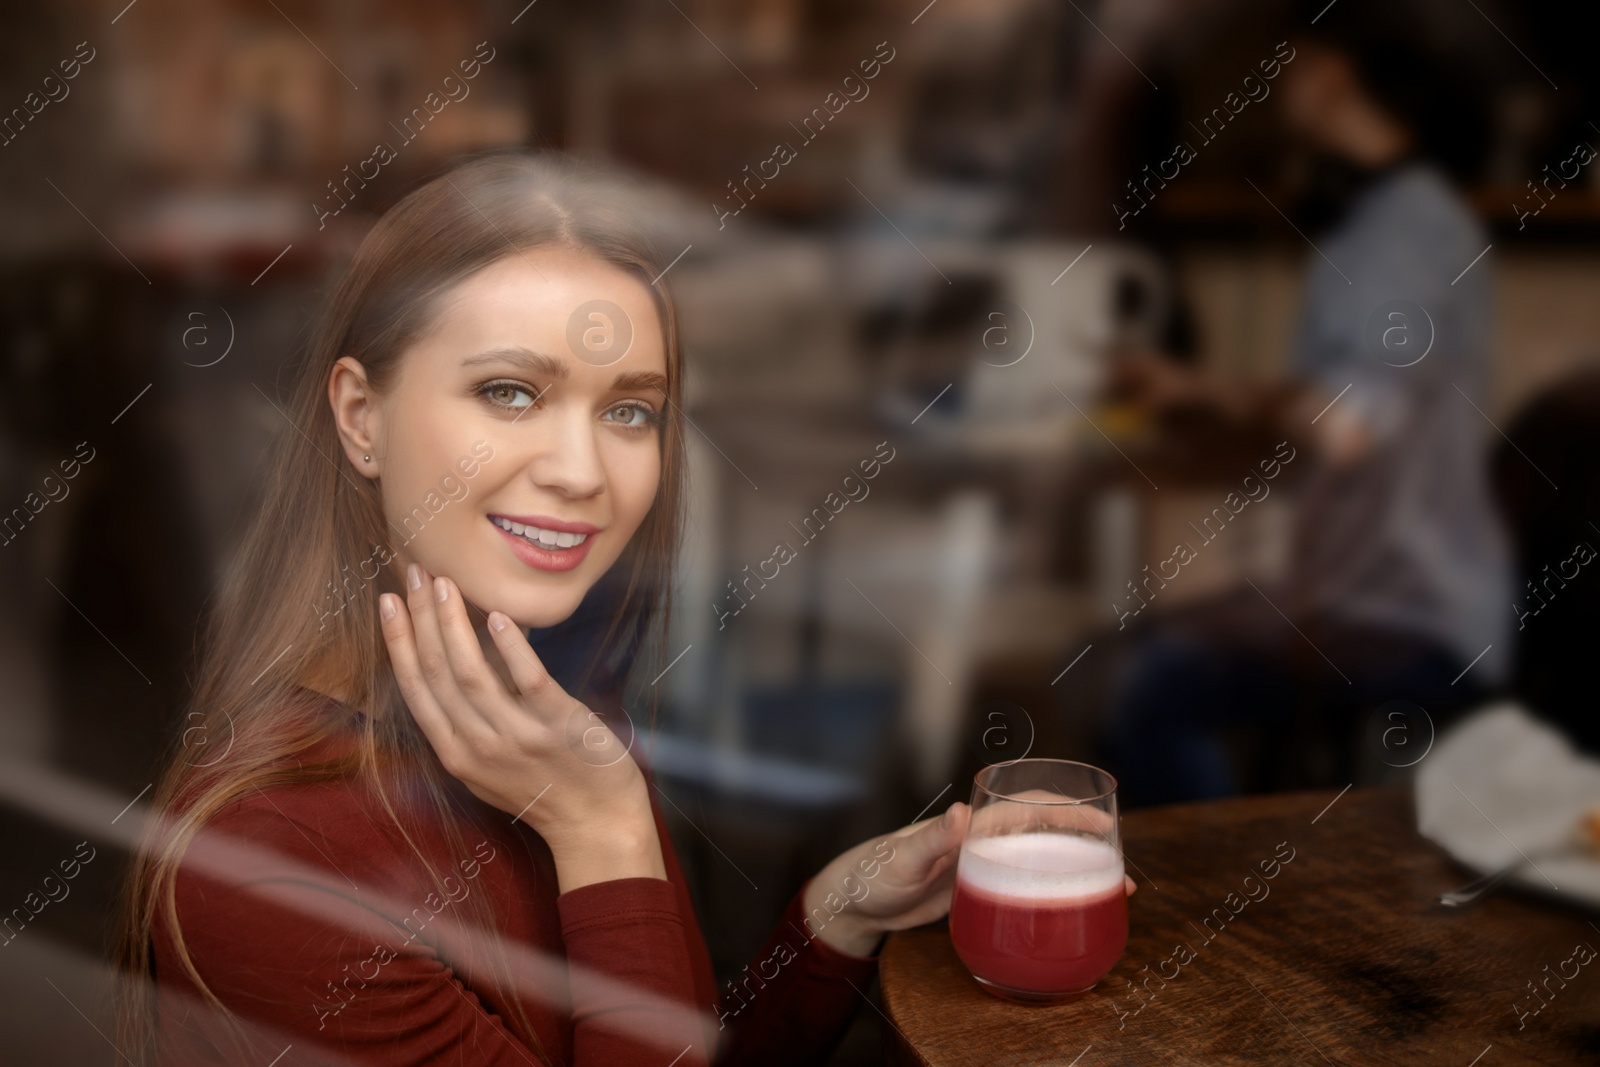 Photo of Pretty young woman with cocktail at table in cafe, view from outdoors through window